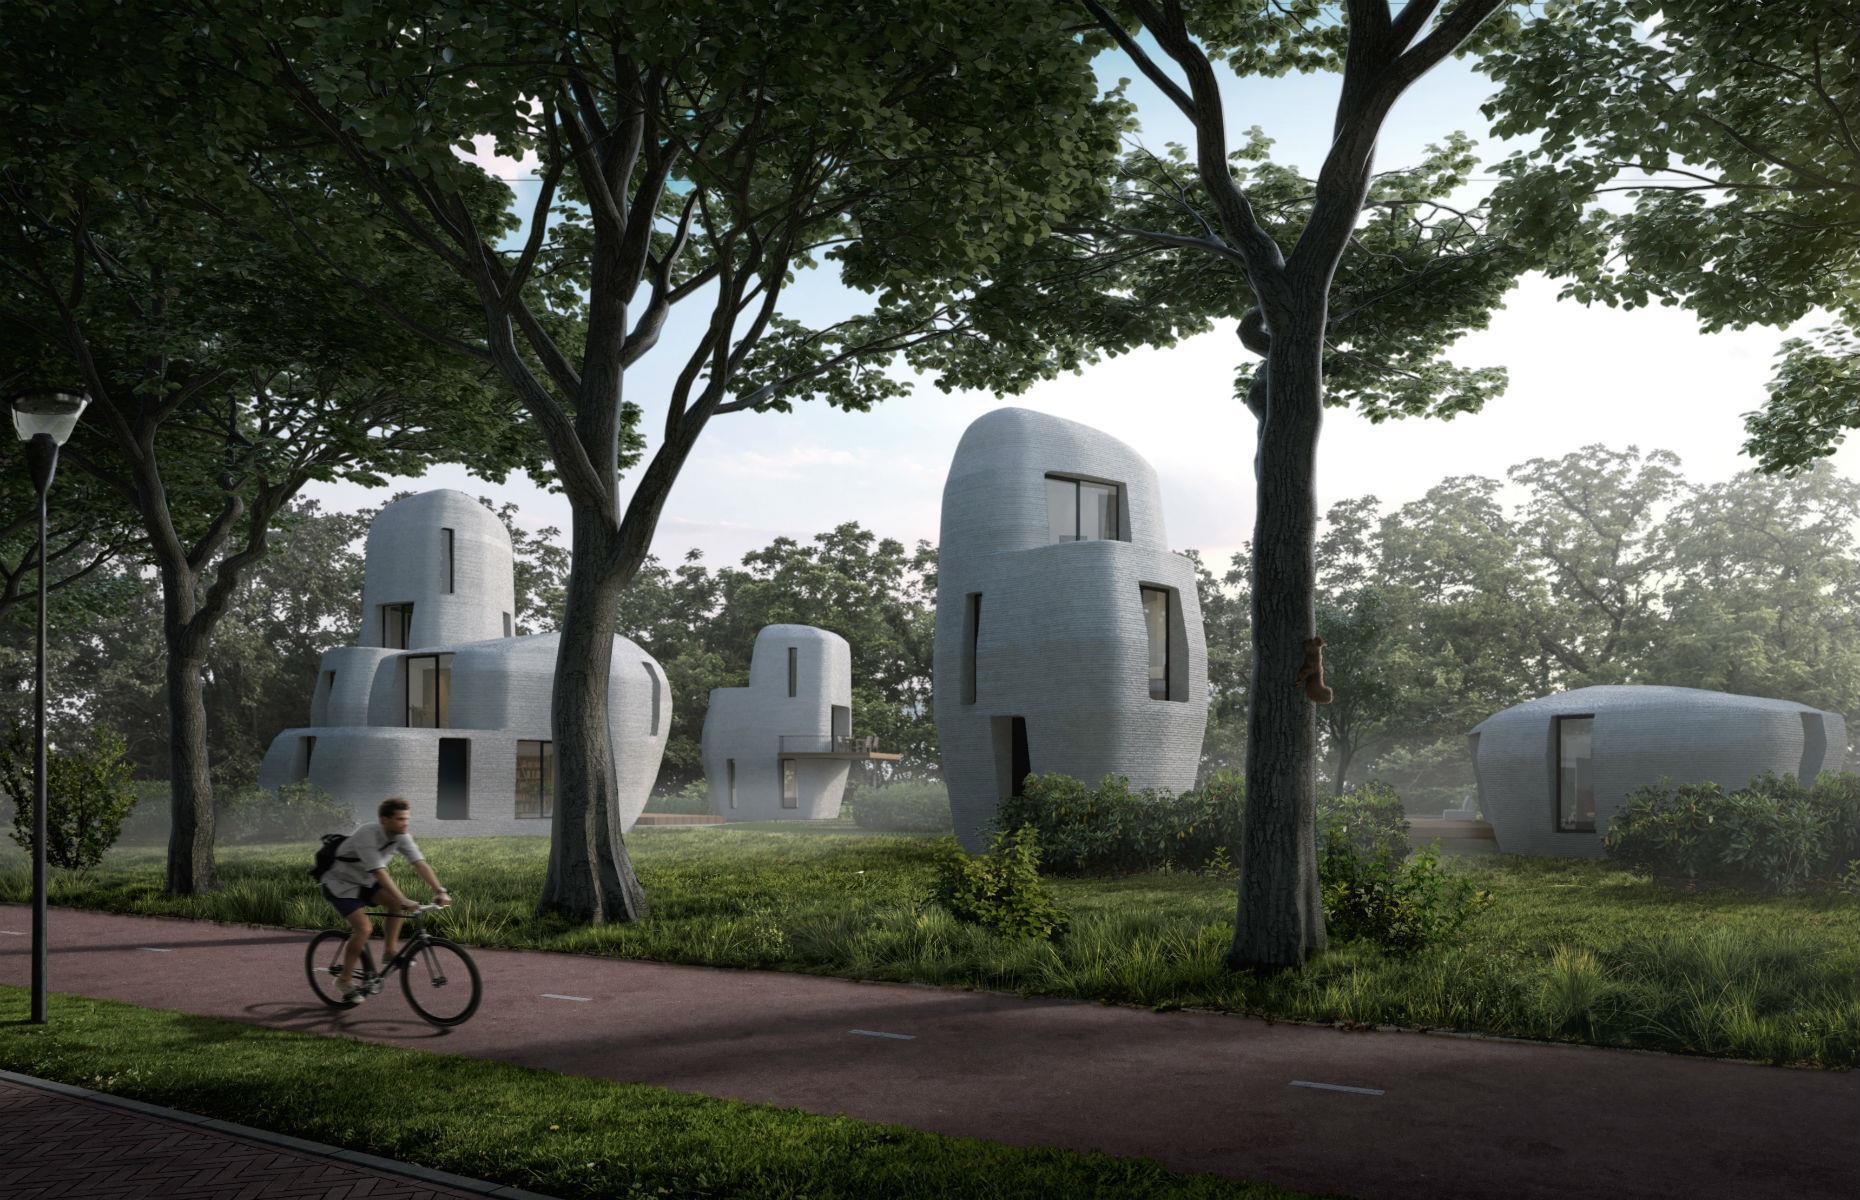 <p>The Netherlands is home to Project Milestone, one of the world’s first 3D-printed housing communities. Undertaken in collaboration with Eindhoven University of Technology, the scheme will offer a mixture of single-story and multi-story homes. The whimsical structures showcase one of the most exciting aspects of 3D printing: the ability to build in almost any shape.</p>